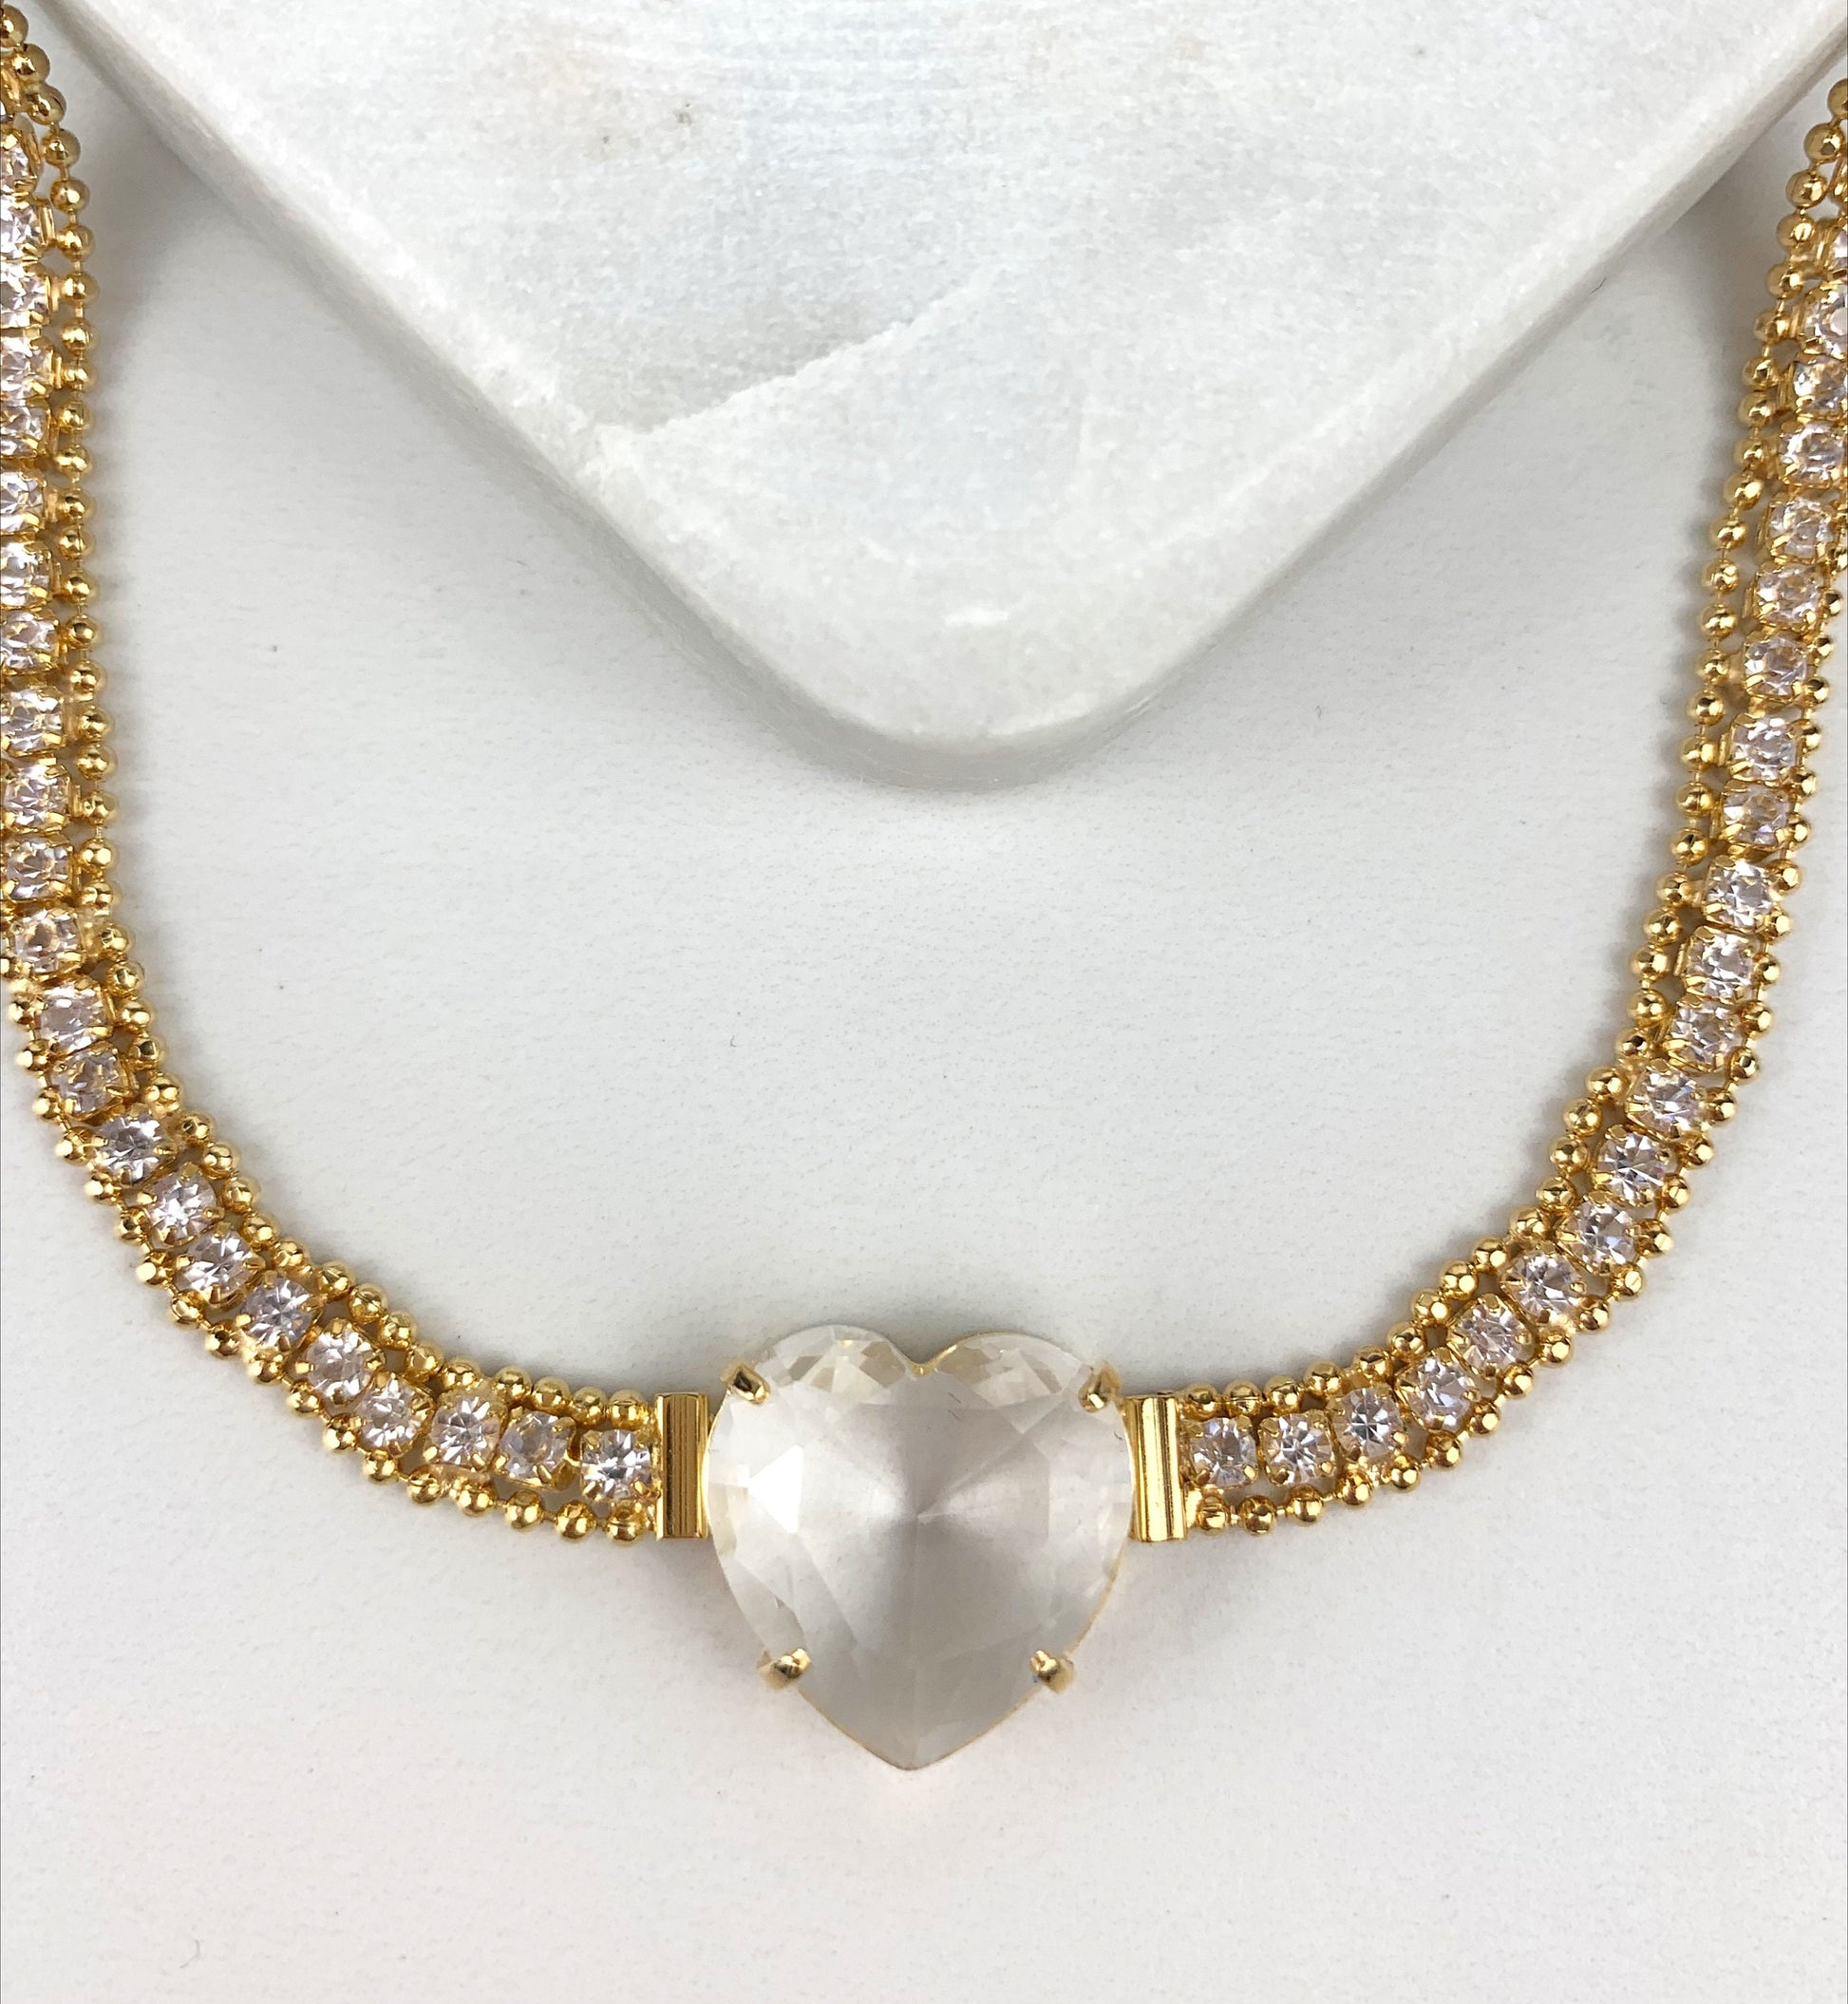 18k Gold Filled Fancy Cristal Heart with Zirconia Carat Diamond  Necklace Choker For Wholesale and Jewelry Supplies